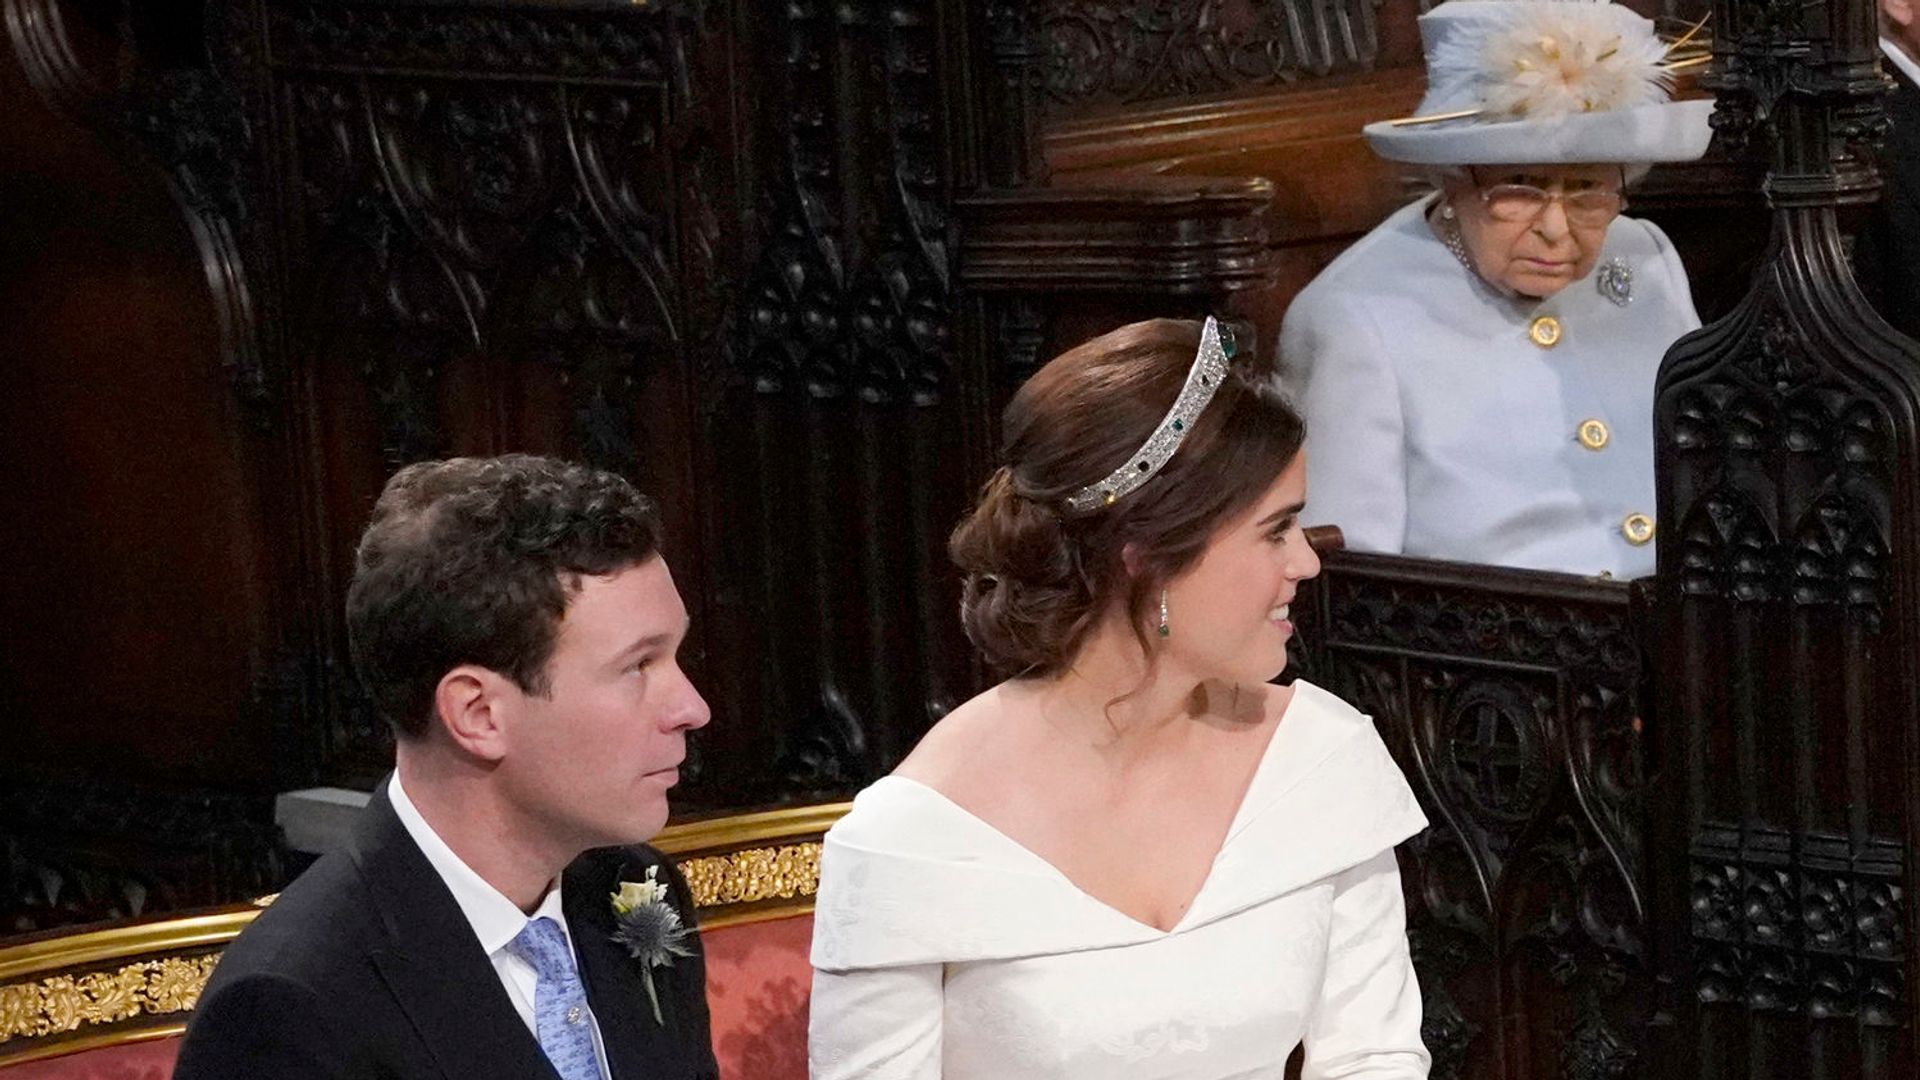 Princess Eugenie and her husband Jack Brooksbank look back towards Queen Elizabeth II on their wedding day